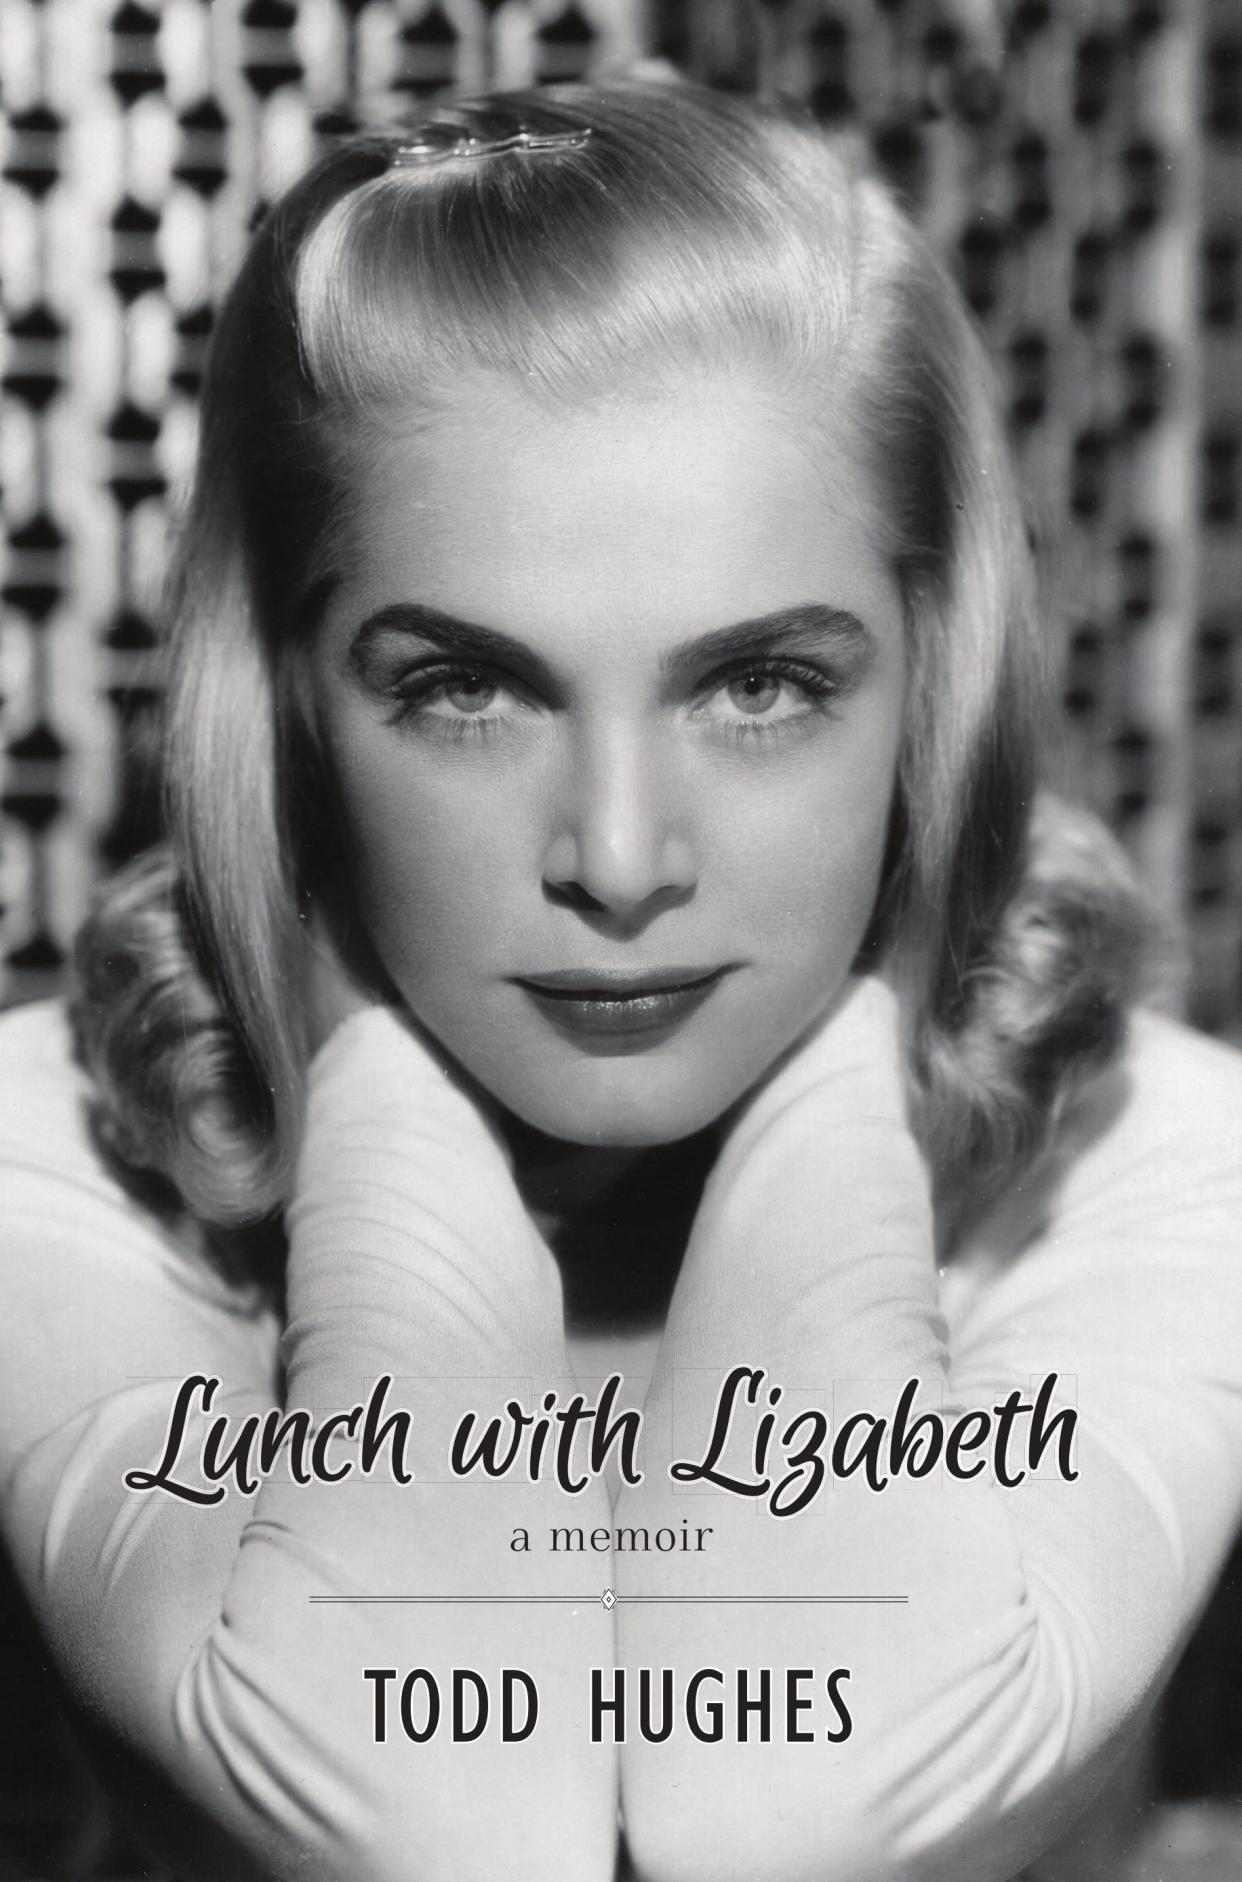 "Lunch With Lizabeth" was released Sept. 29, 2022